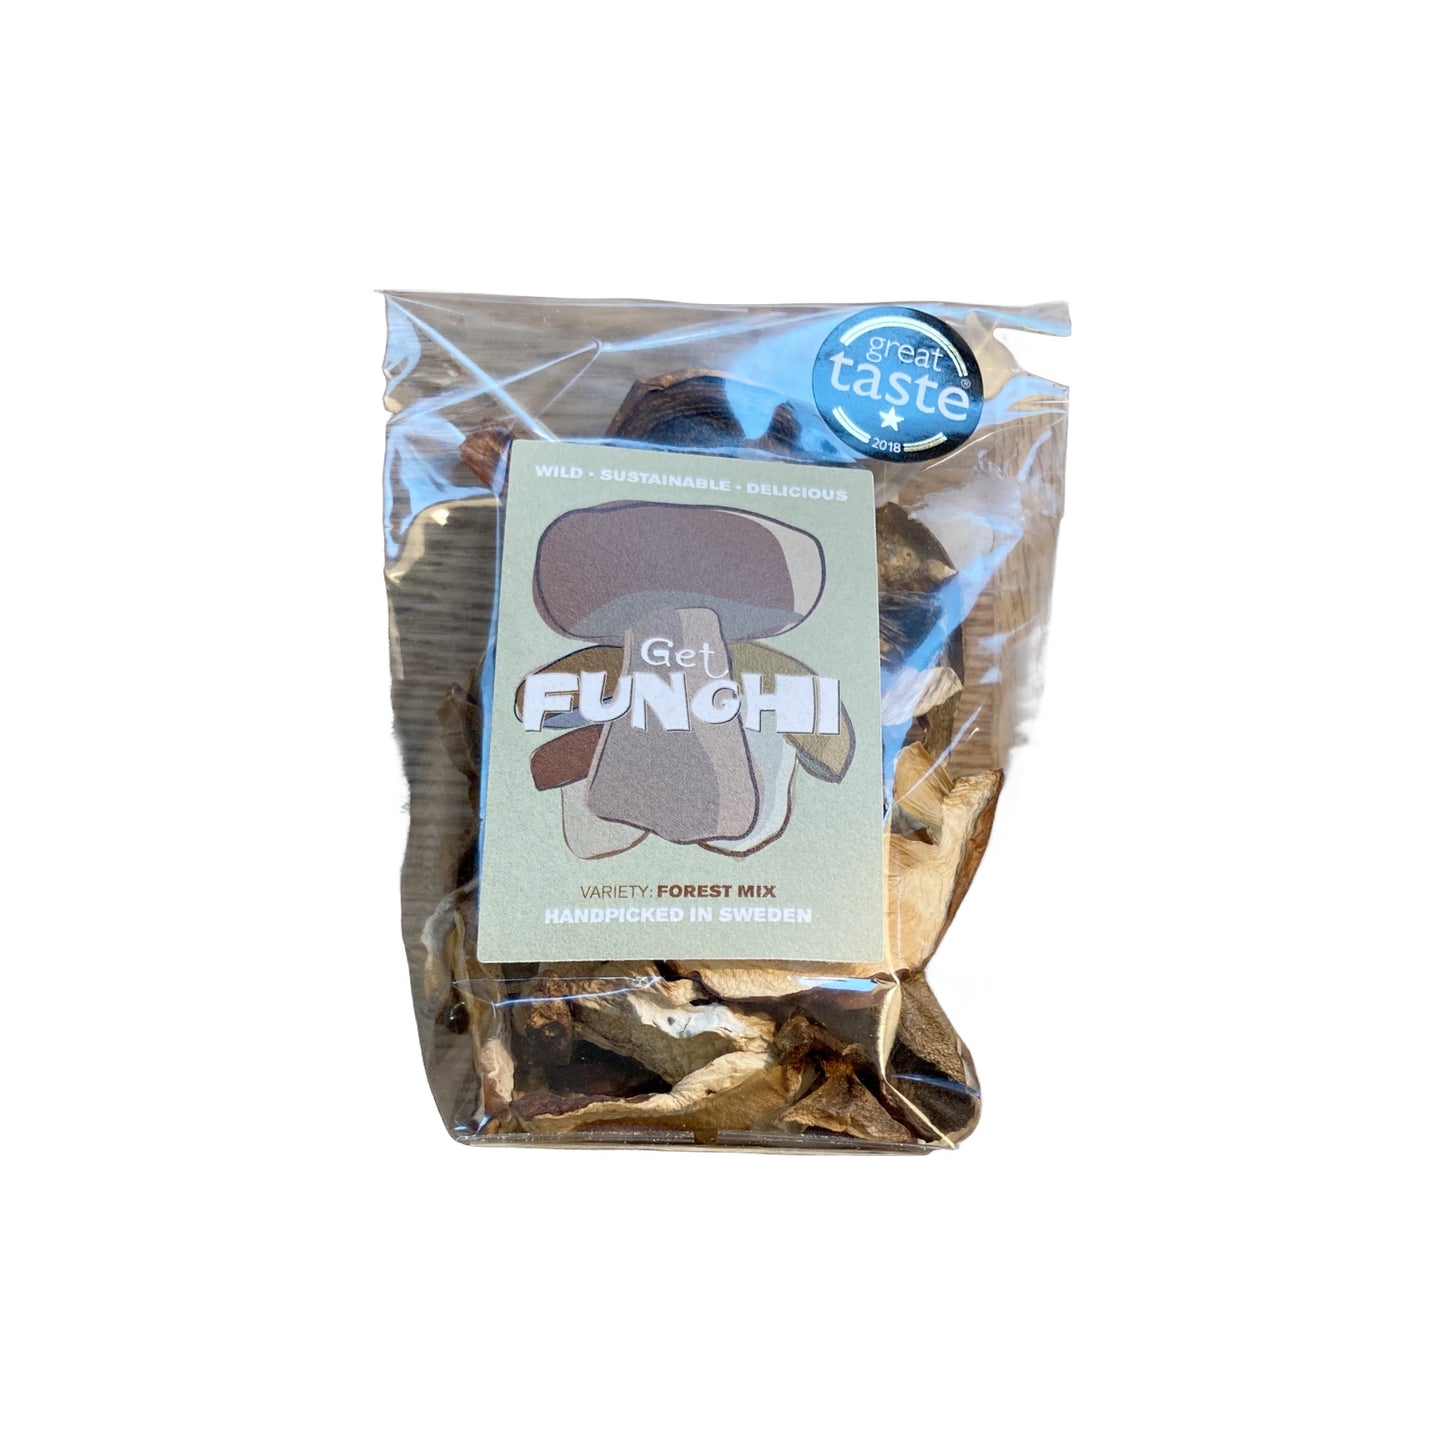 Get Funghi Forest Mix